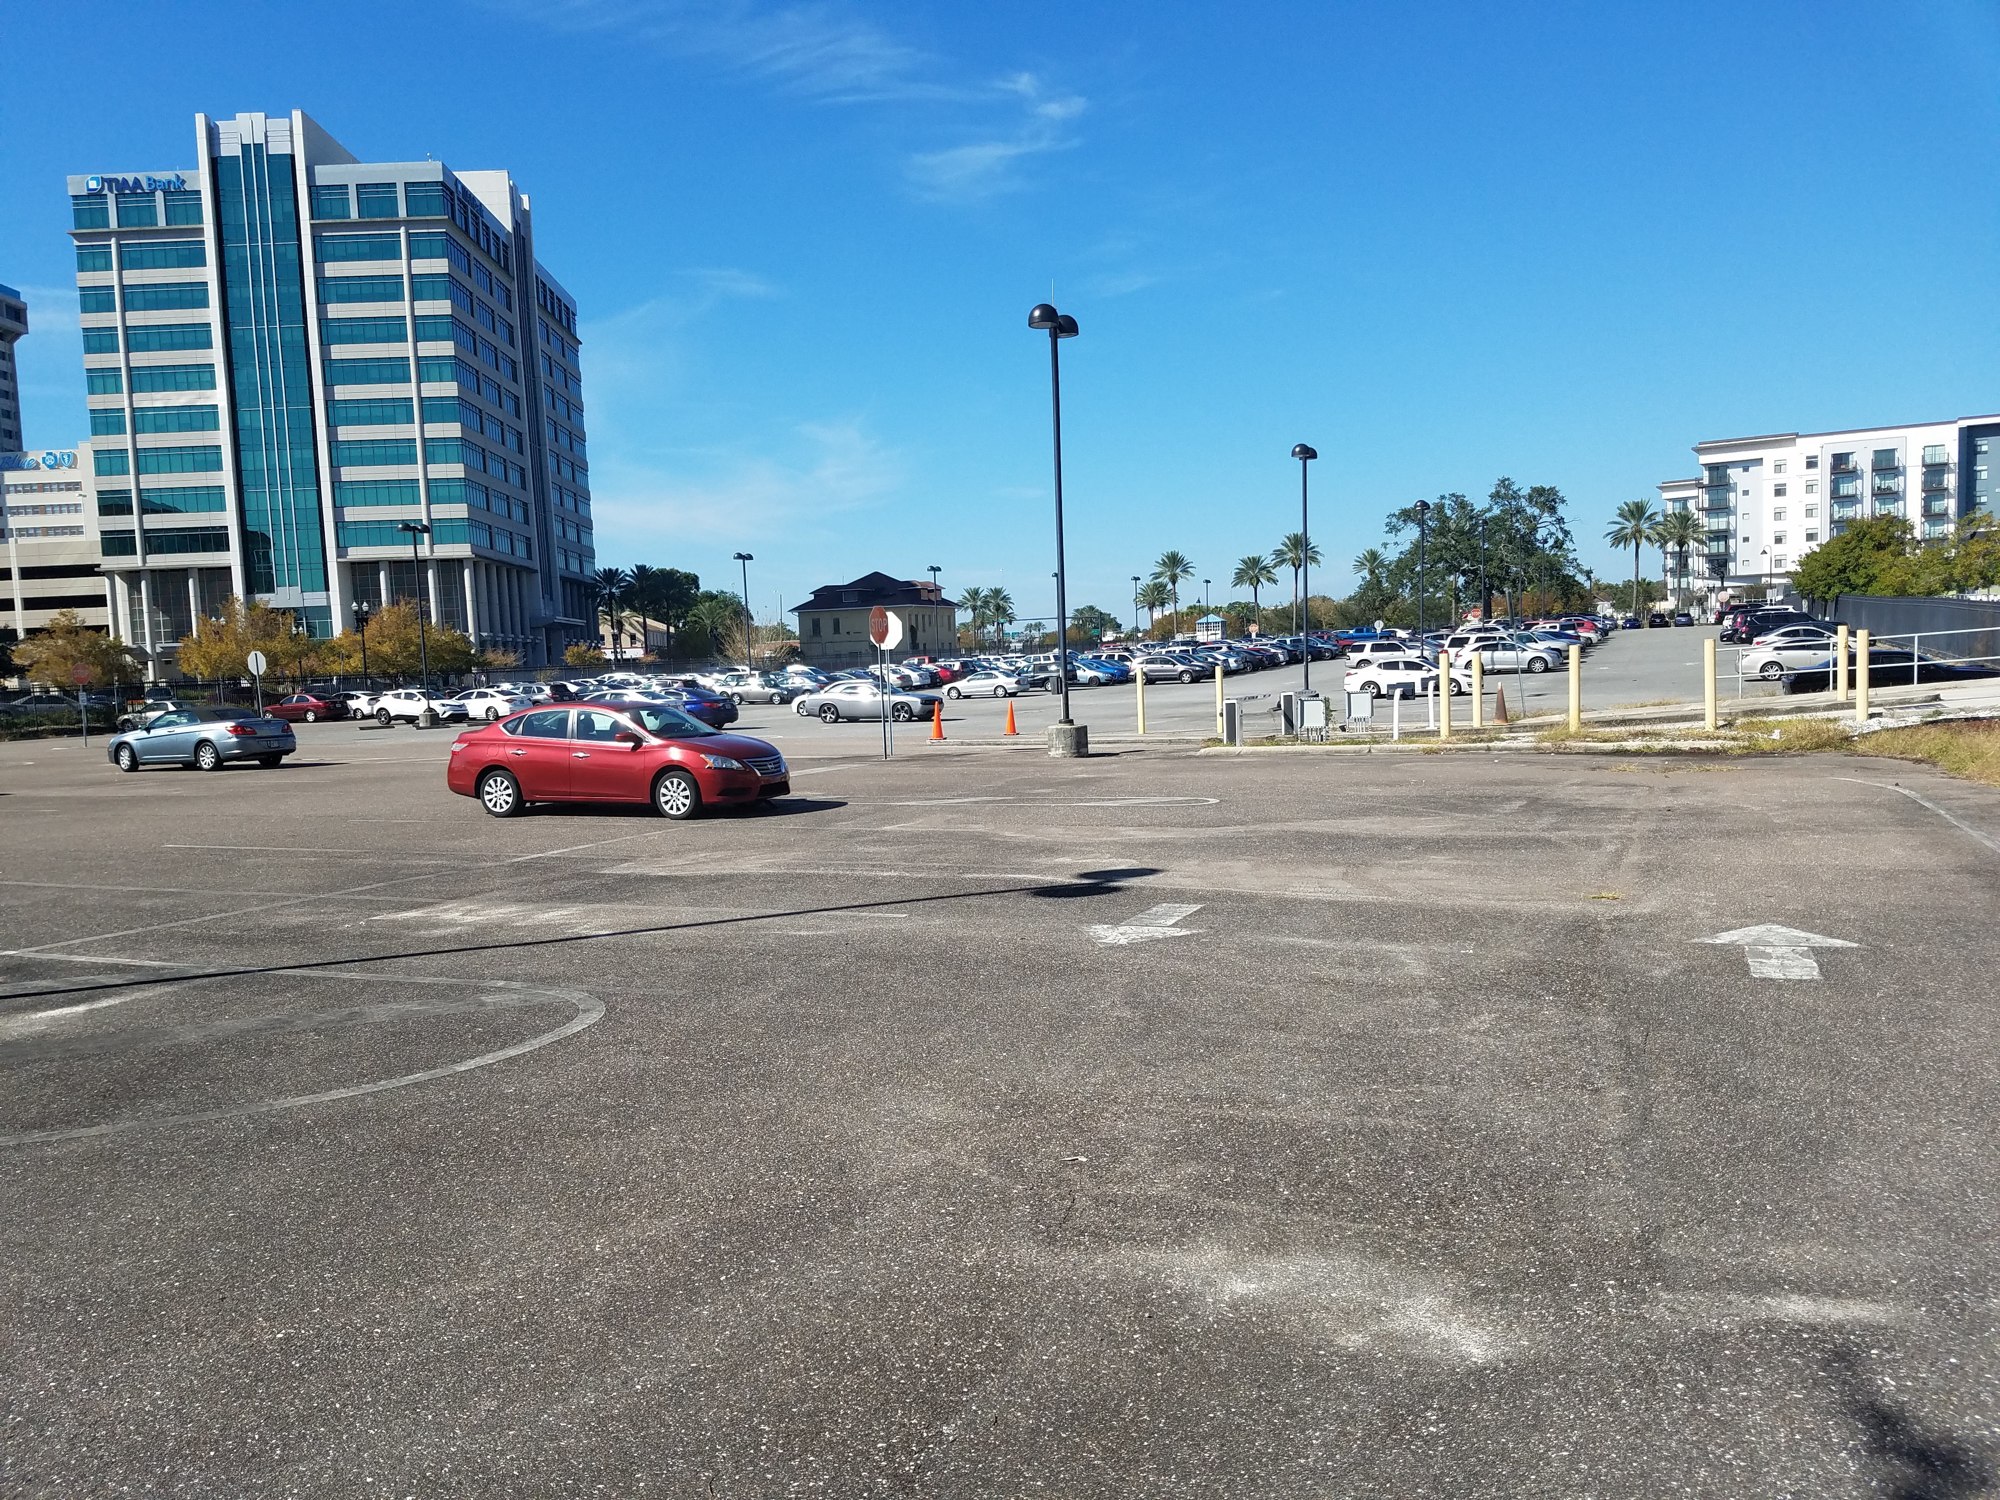 The  Florida Blue surface parking lot that will become the FIS headquarters.